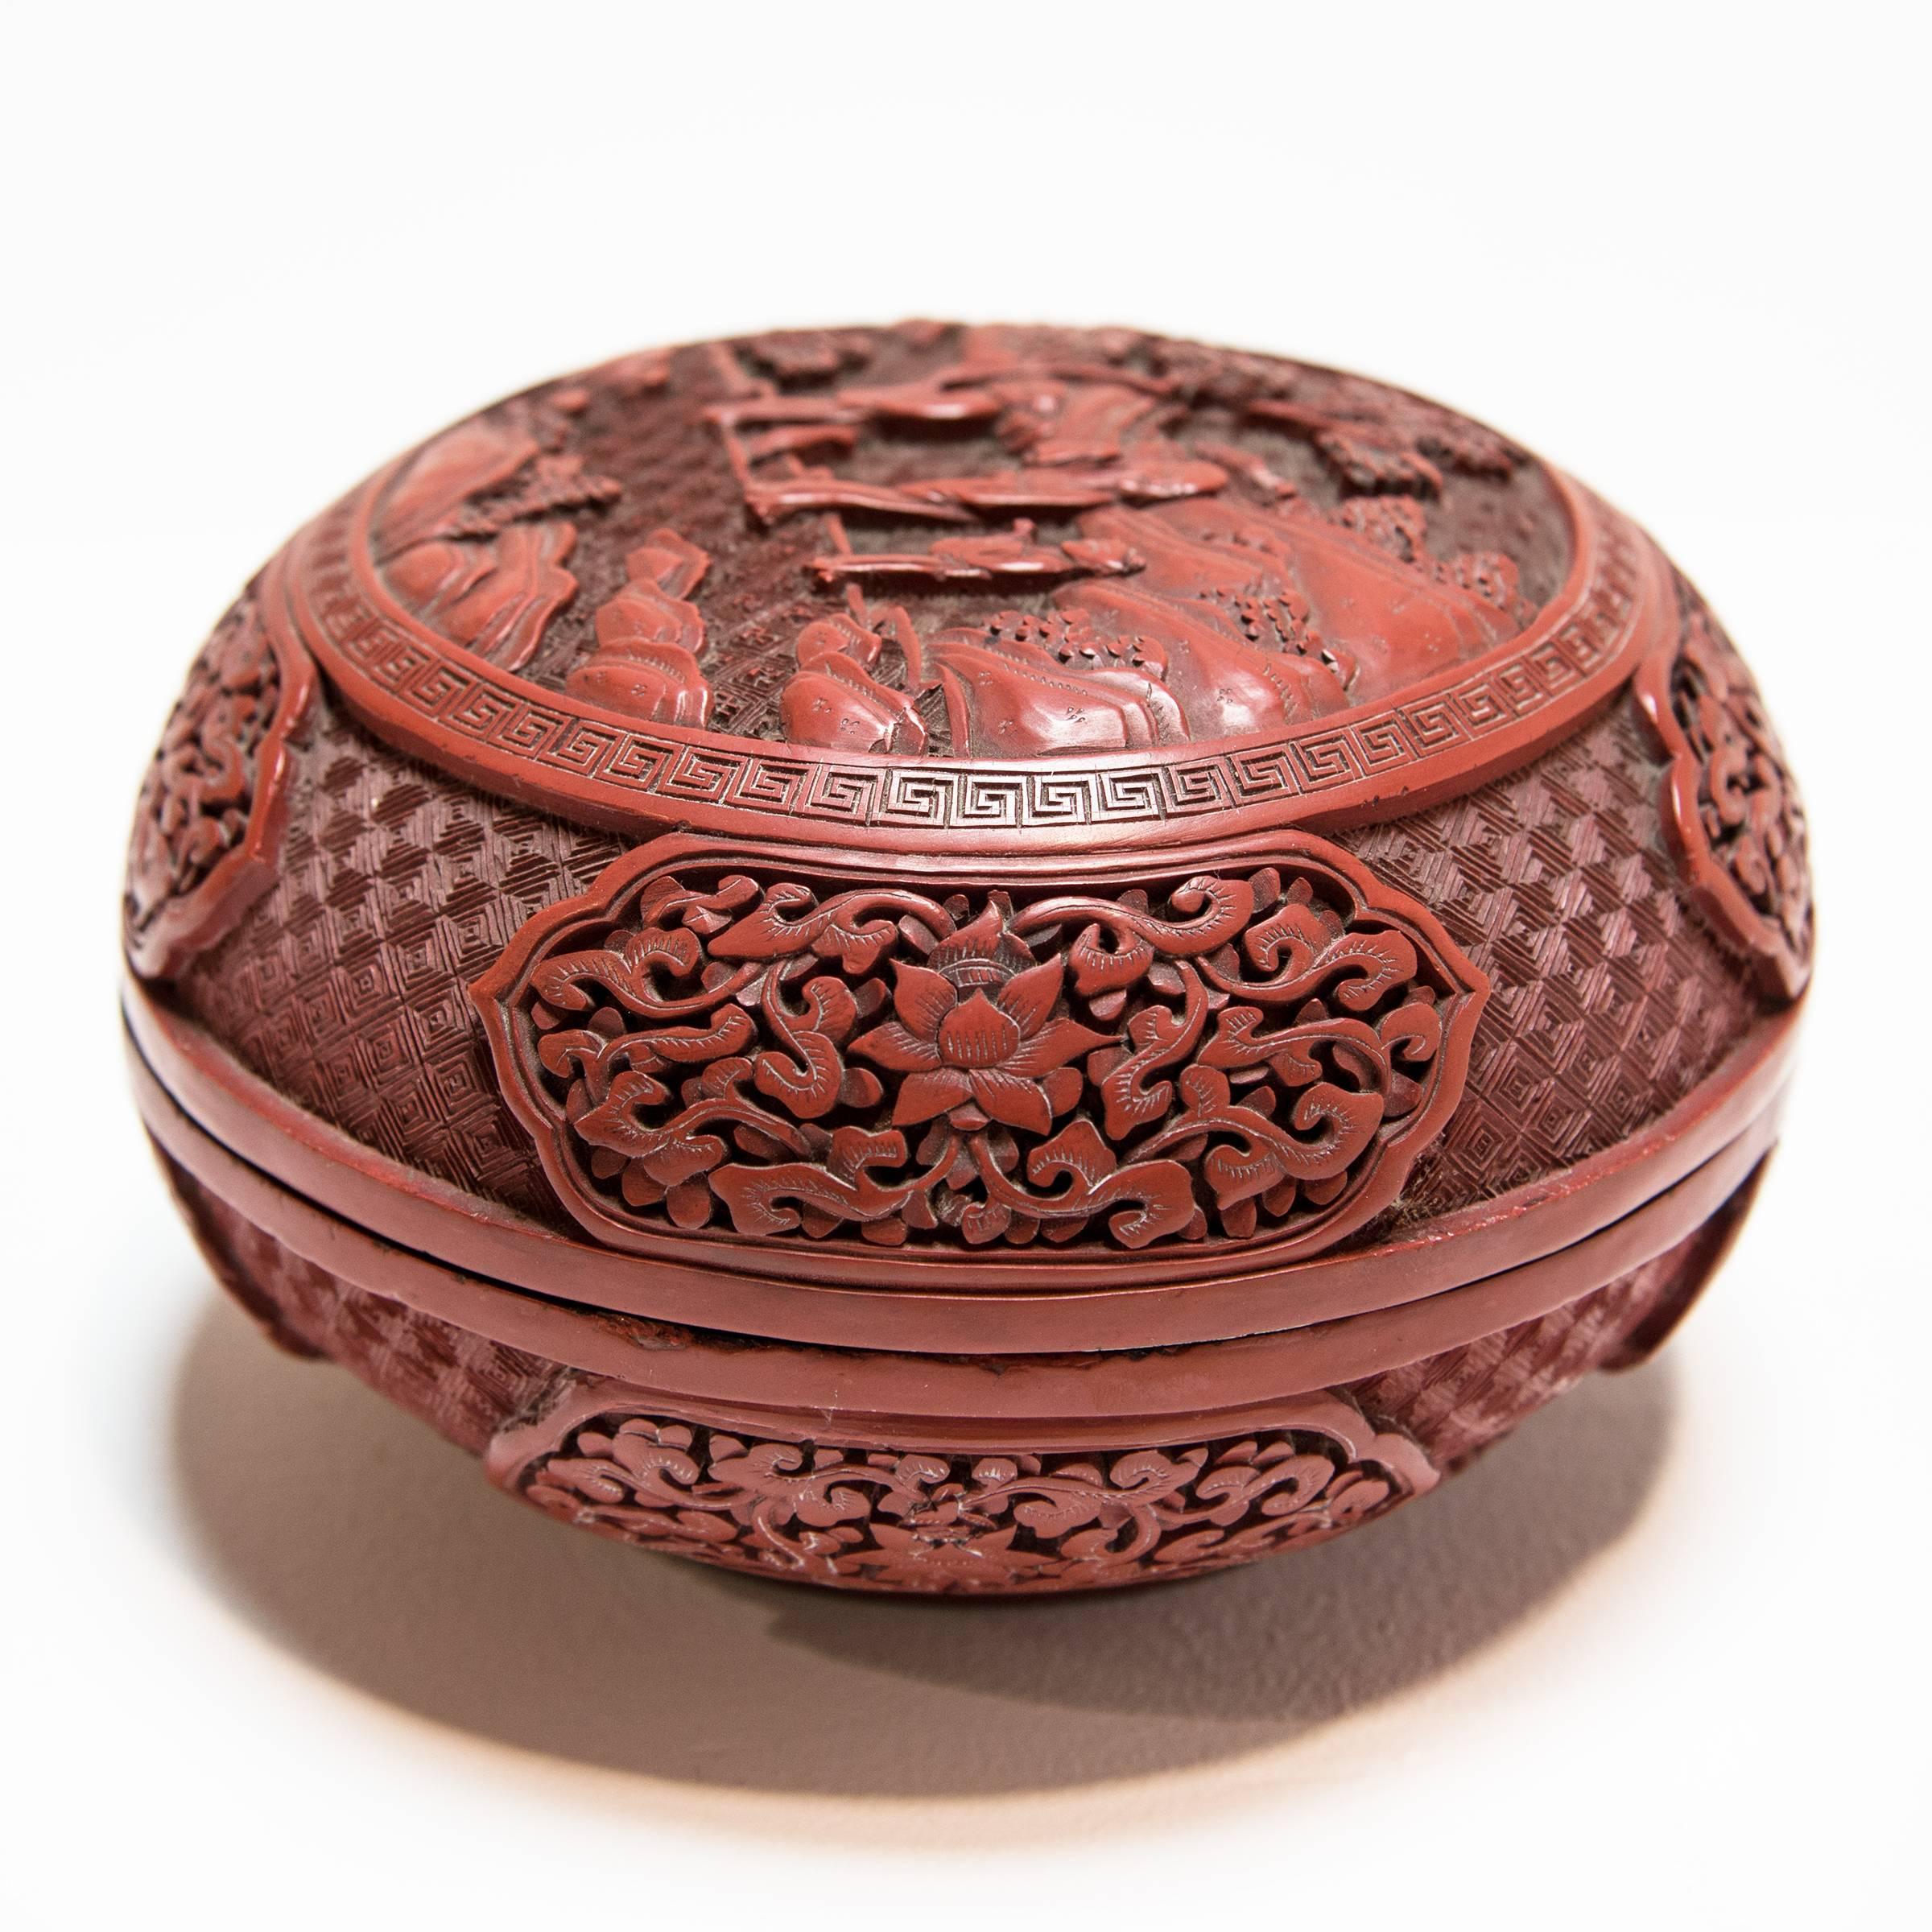 A mineral called cinnabar gives this domed box a stunning red color, and creates a striking contrast with the glossy, black interior. The entire surface is intricately carved: on the lid, three figures stroll through an idyllic garden setting; on